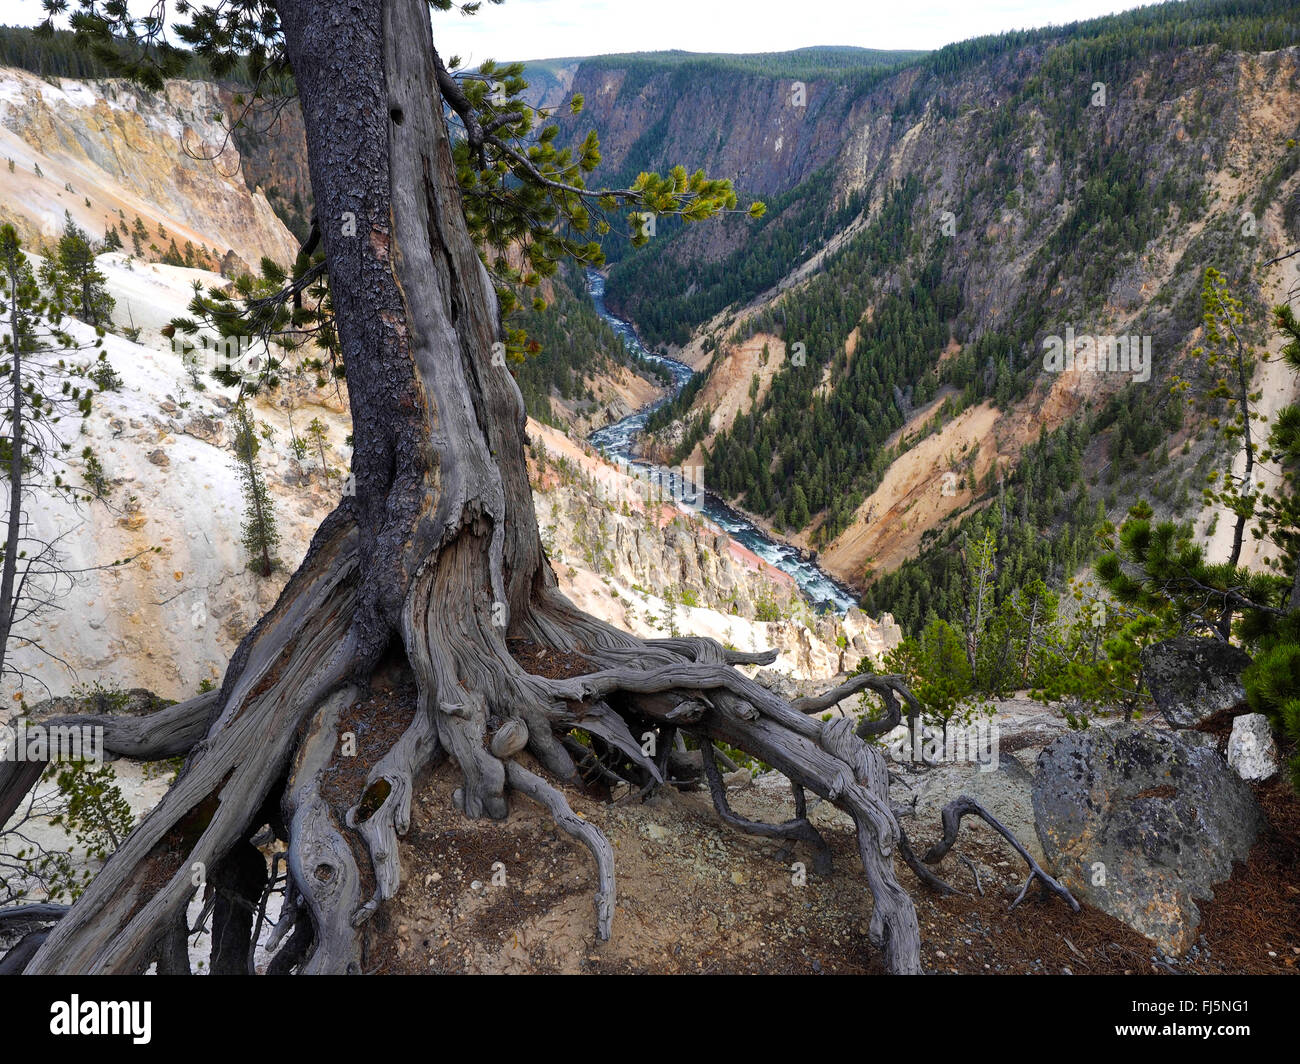 Pin (Pinus spec.), vieux pins au Grand Canyon de Yellowstone, USA, Wyoming, Yellowstone National Park Banque D'Images